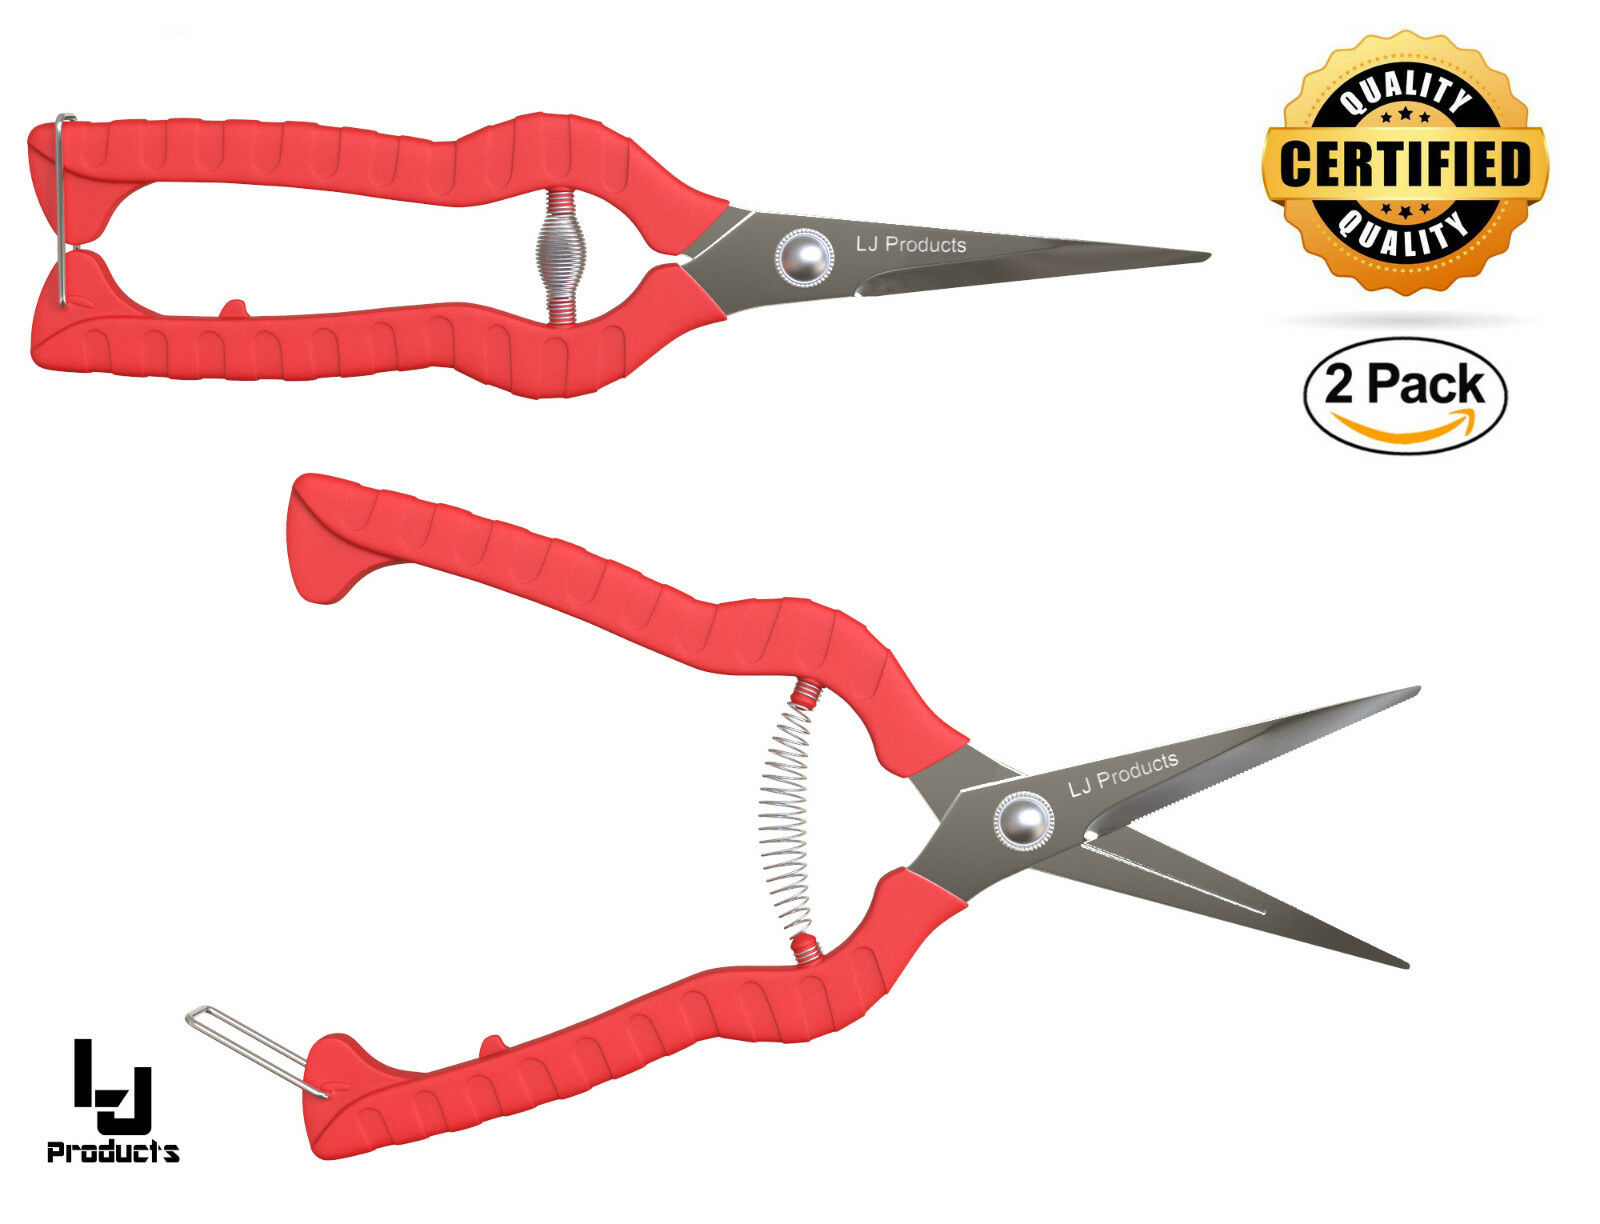 (2 Pack) Trimming Pruning Scissors Stainless Steel For Gardening And Plants